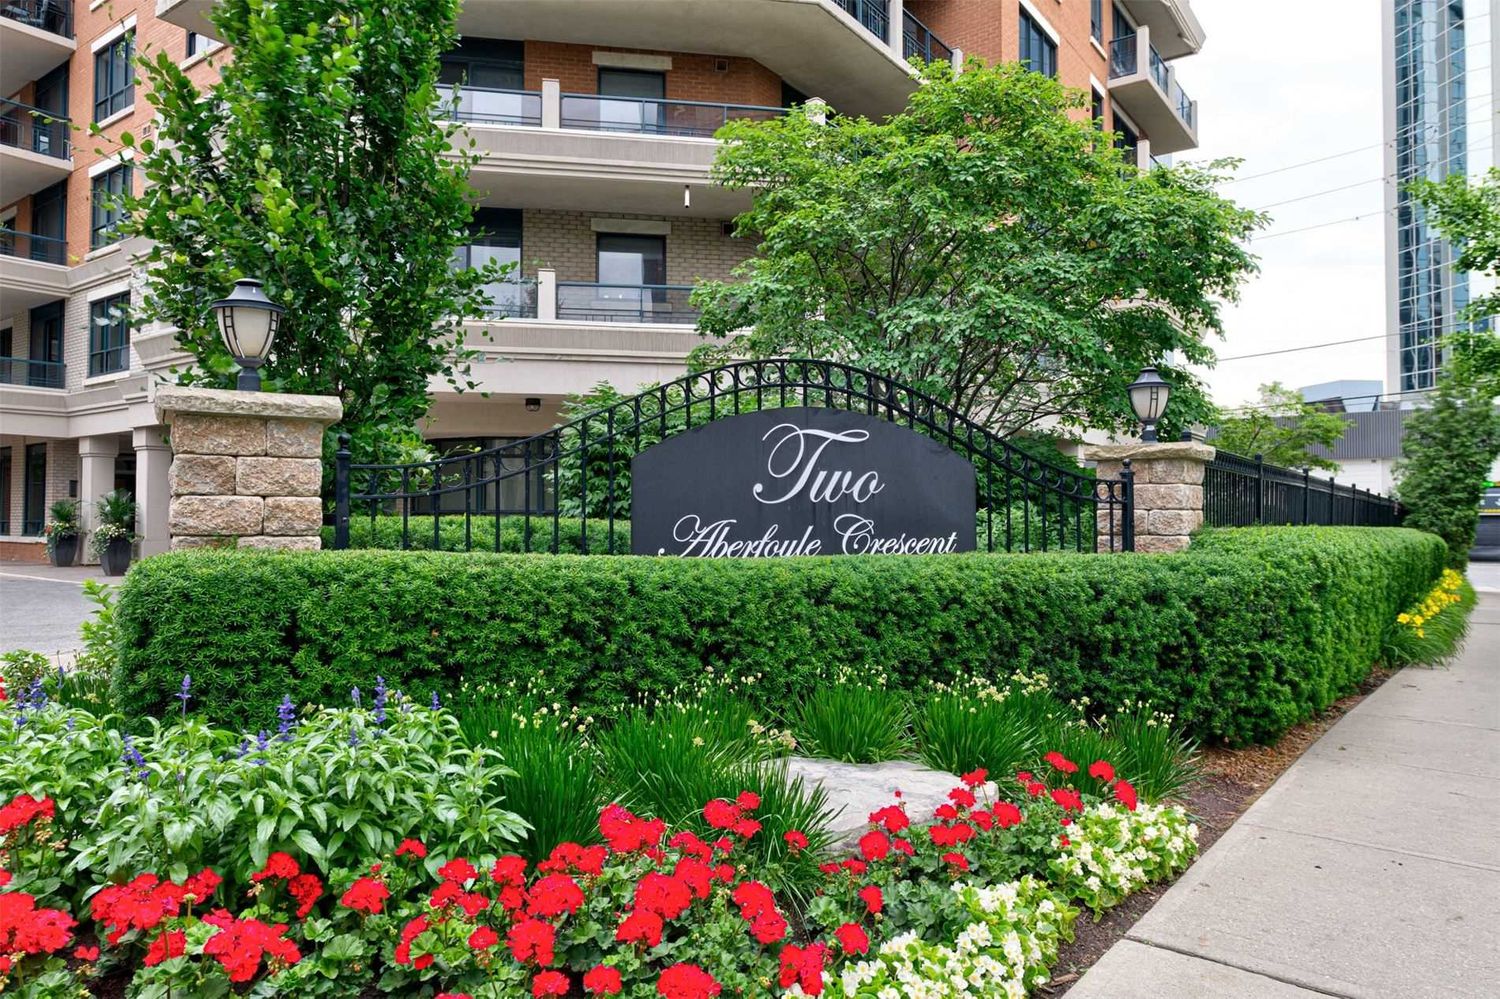 2 Aberfoyle Crescent. Town & Country II Condos is located in  Etobicoke, Toronto - image #3 of 3